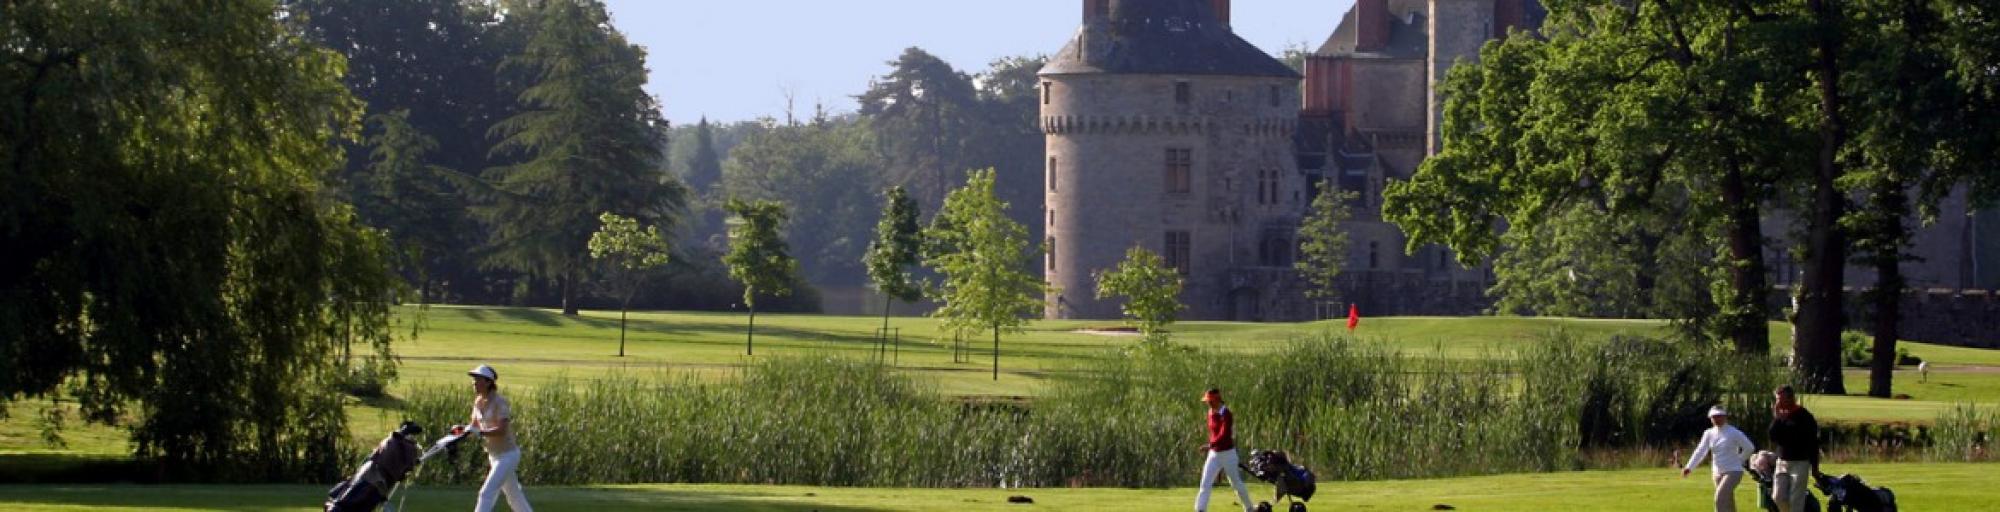 The Chateau Golf des Sept Tours's picturesque golf course in gorgeous Loire Valley.